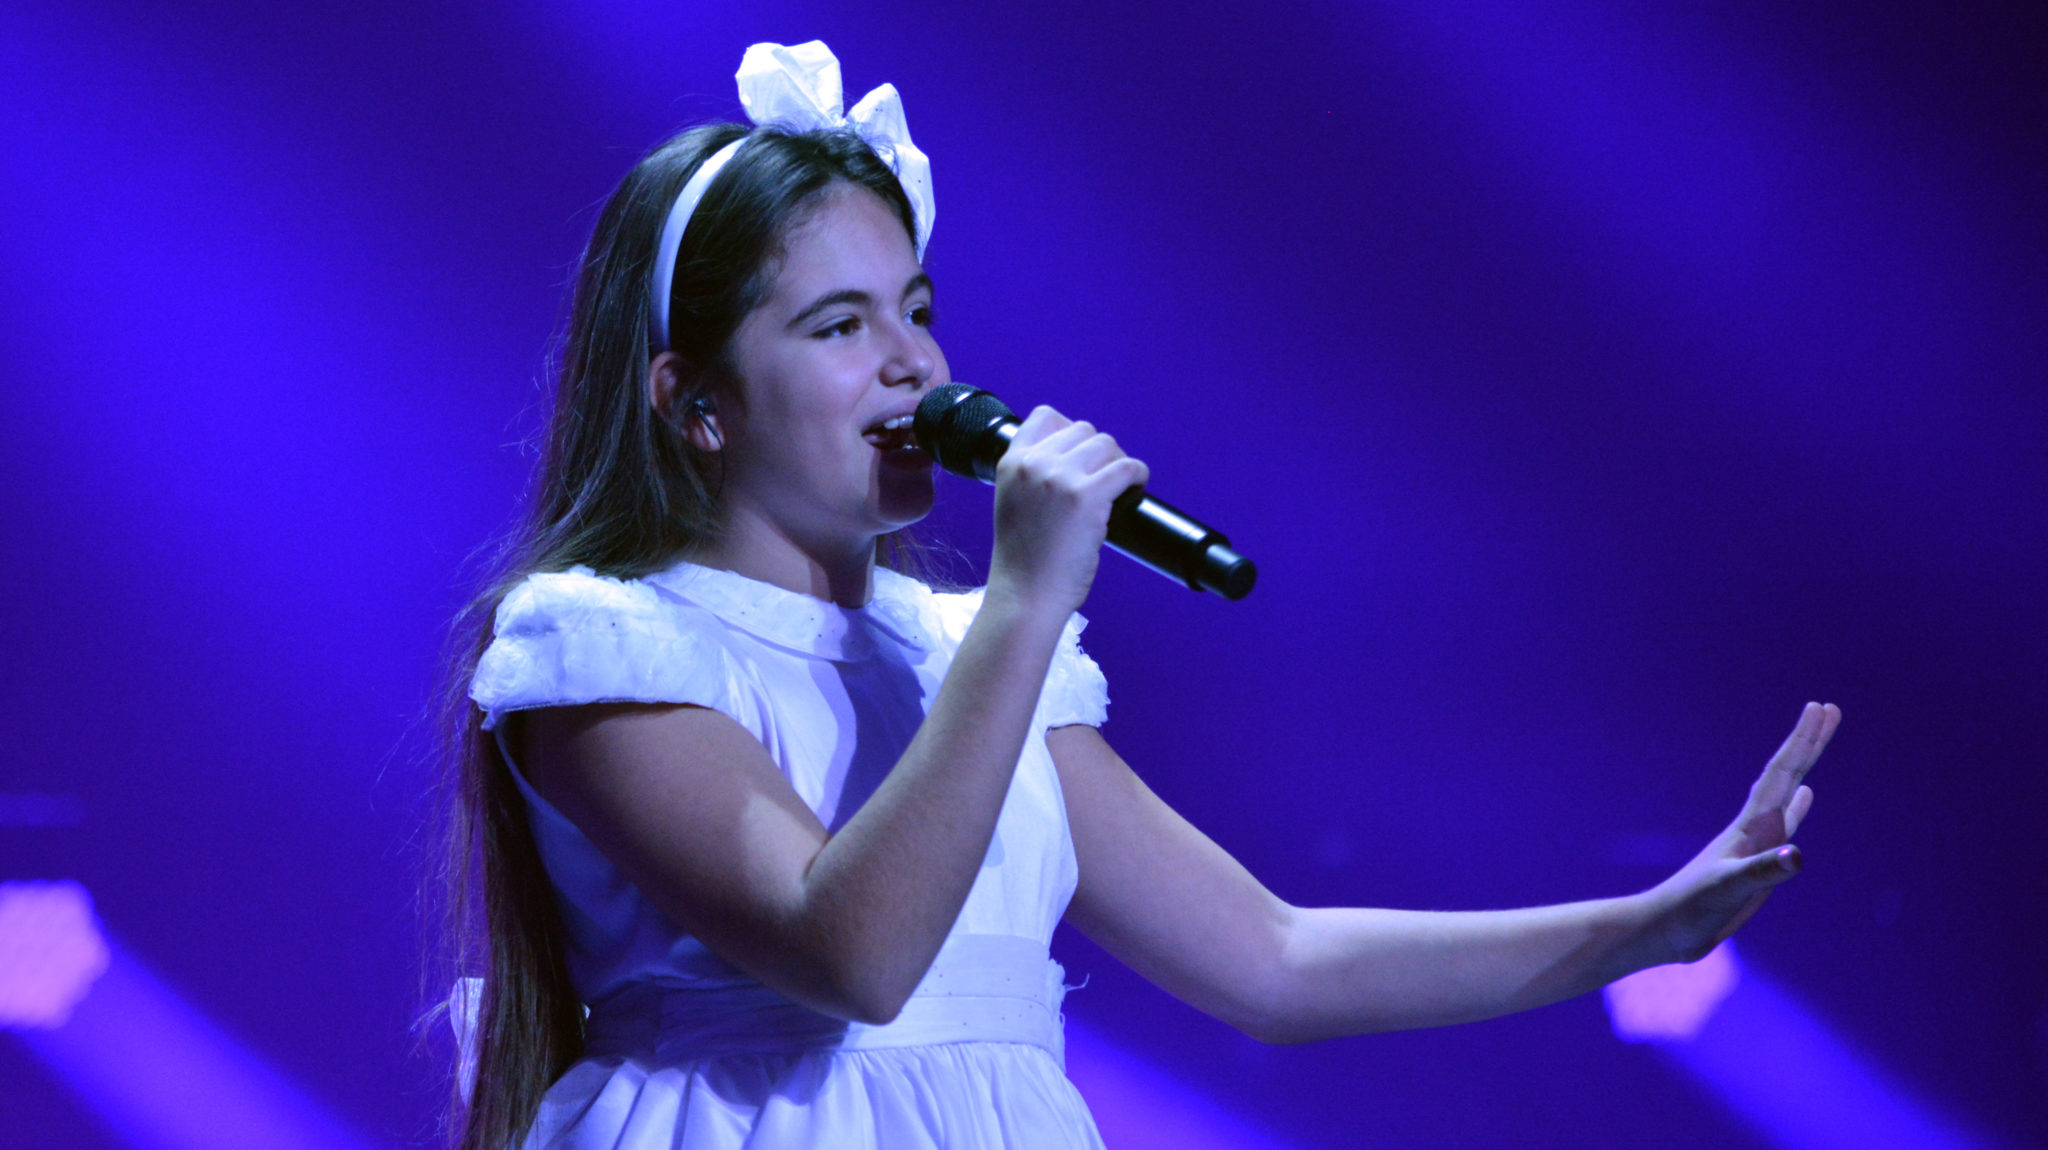 Junior Eurovision: Gaia Cauchi releases new song “Floating on Air”!